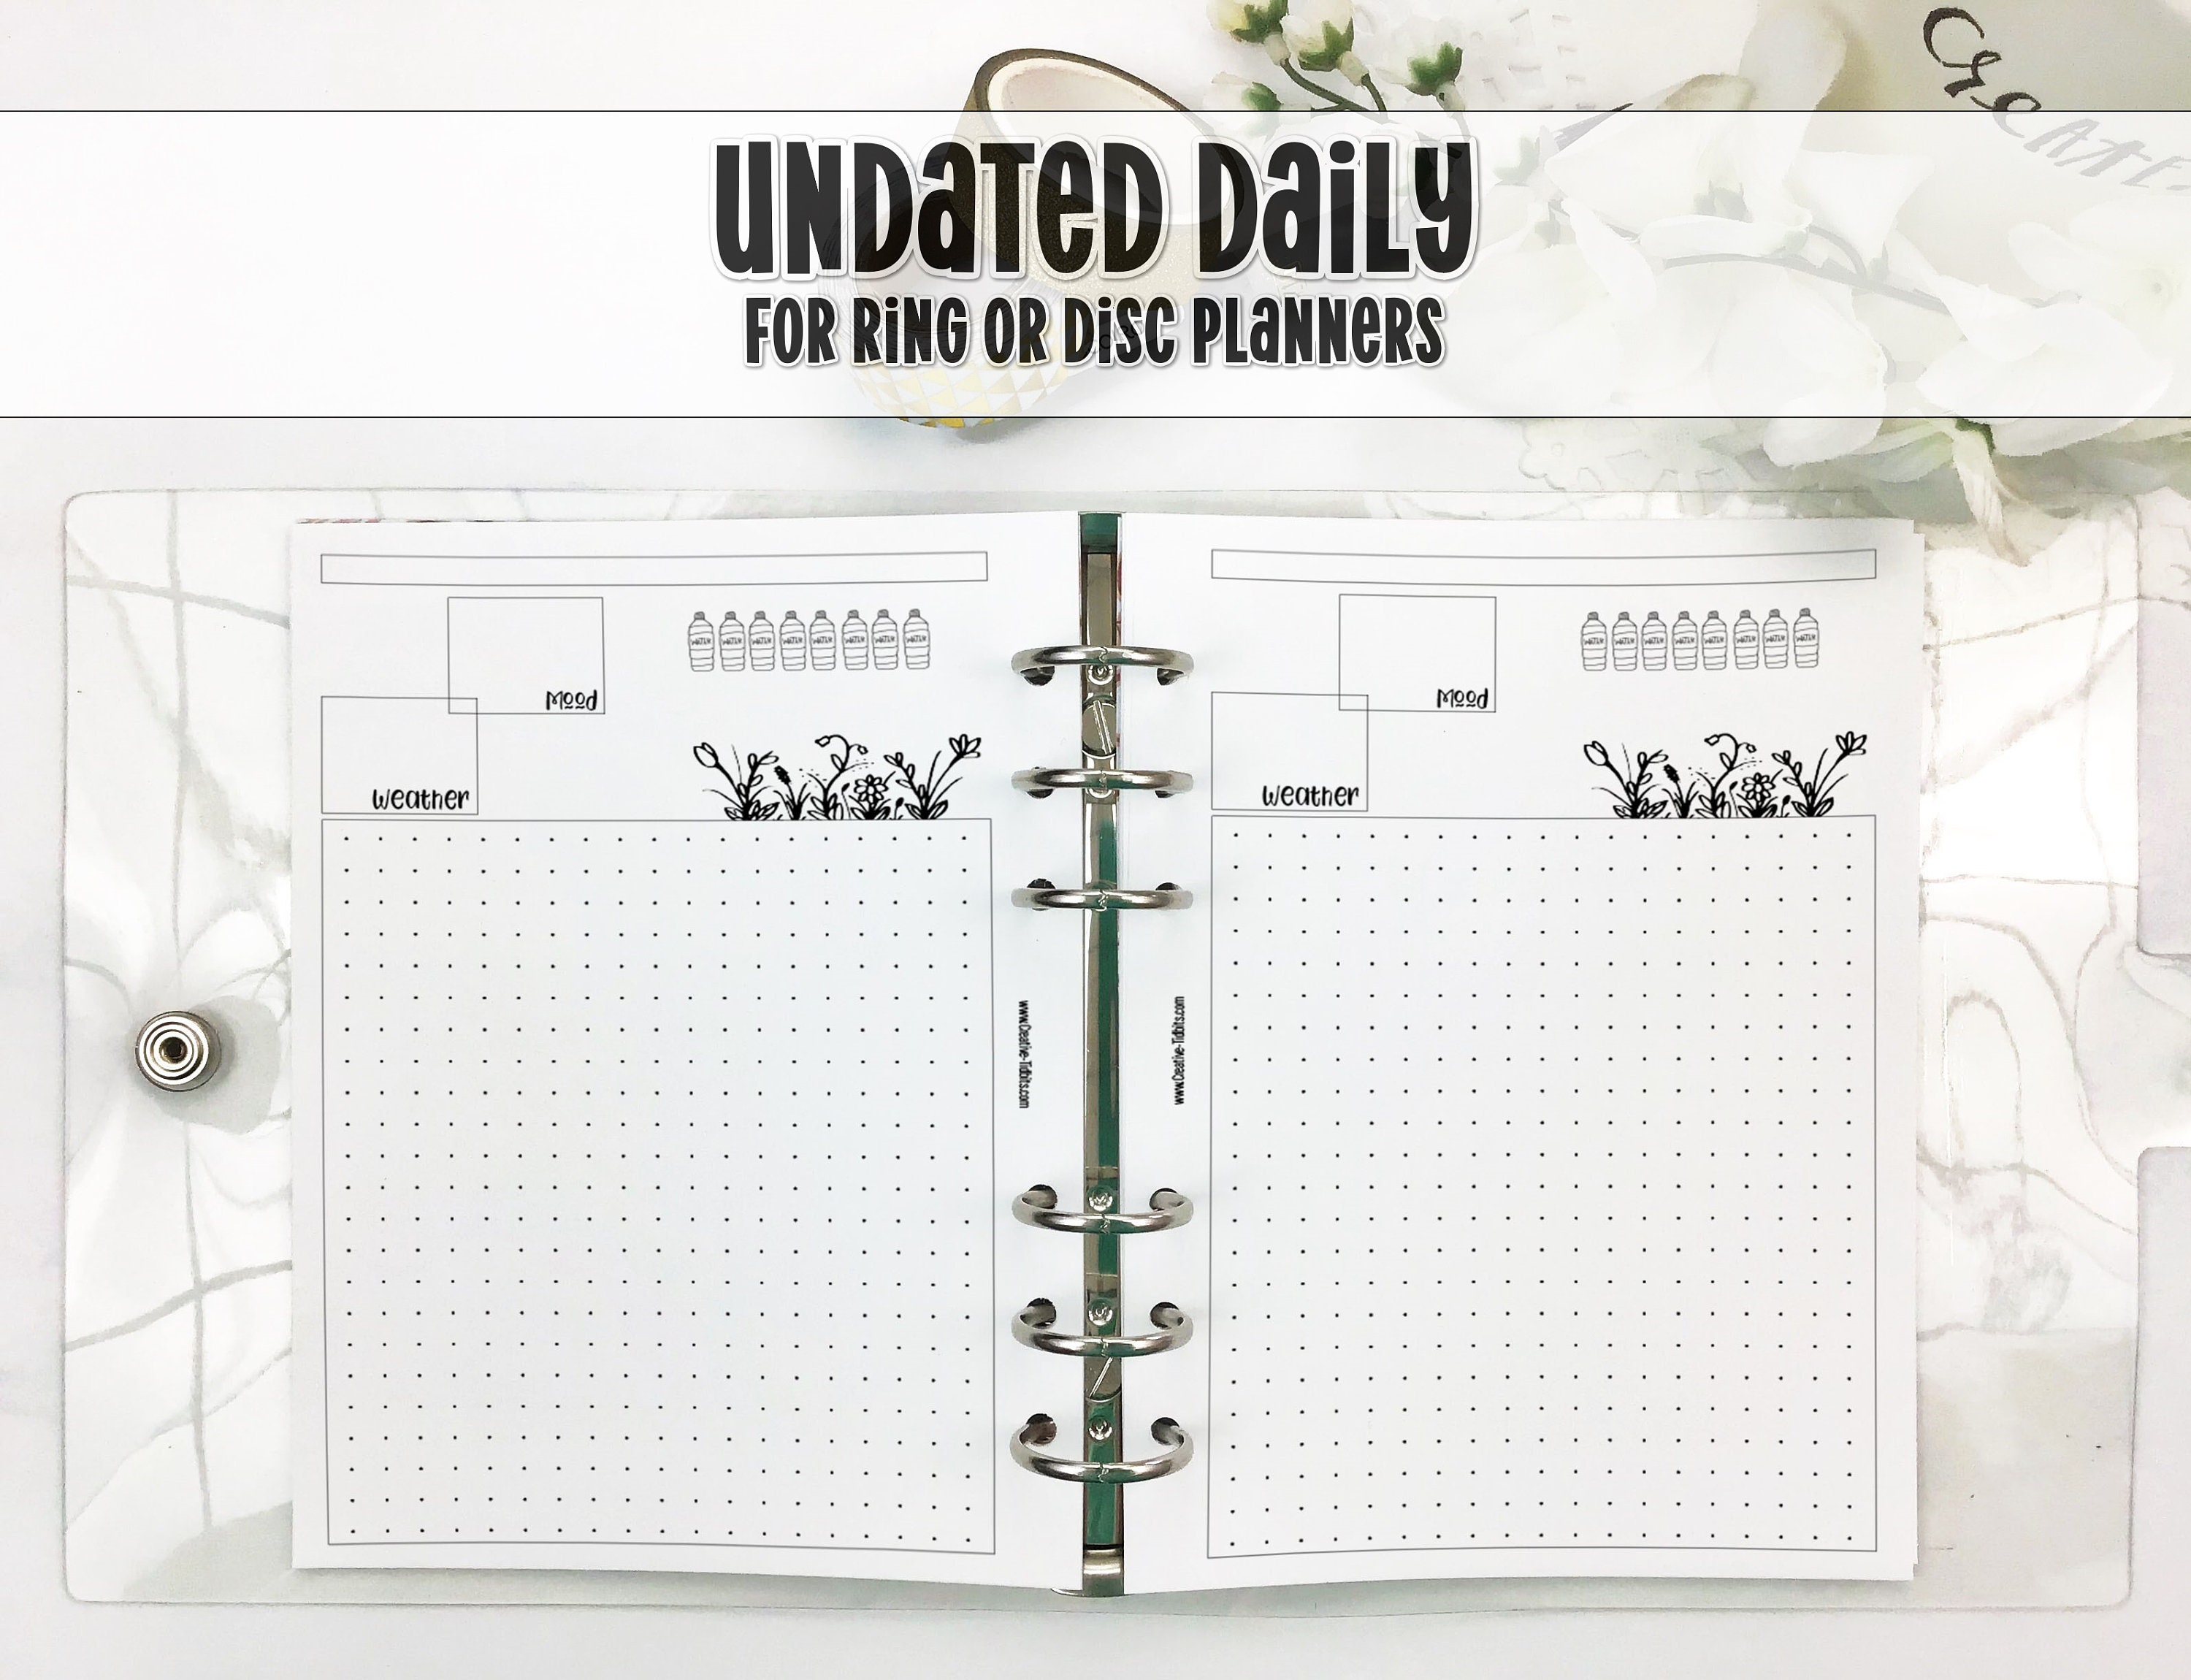 Carpe Diem A5 Undated 12-month Planner Box Color Wash / Feathers / Ditsy  Floral Calendar Weekly Layout 